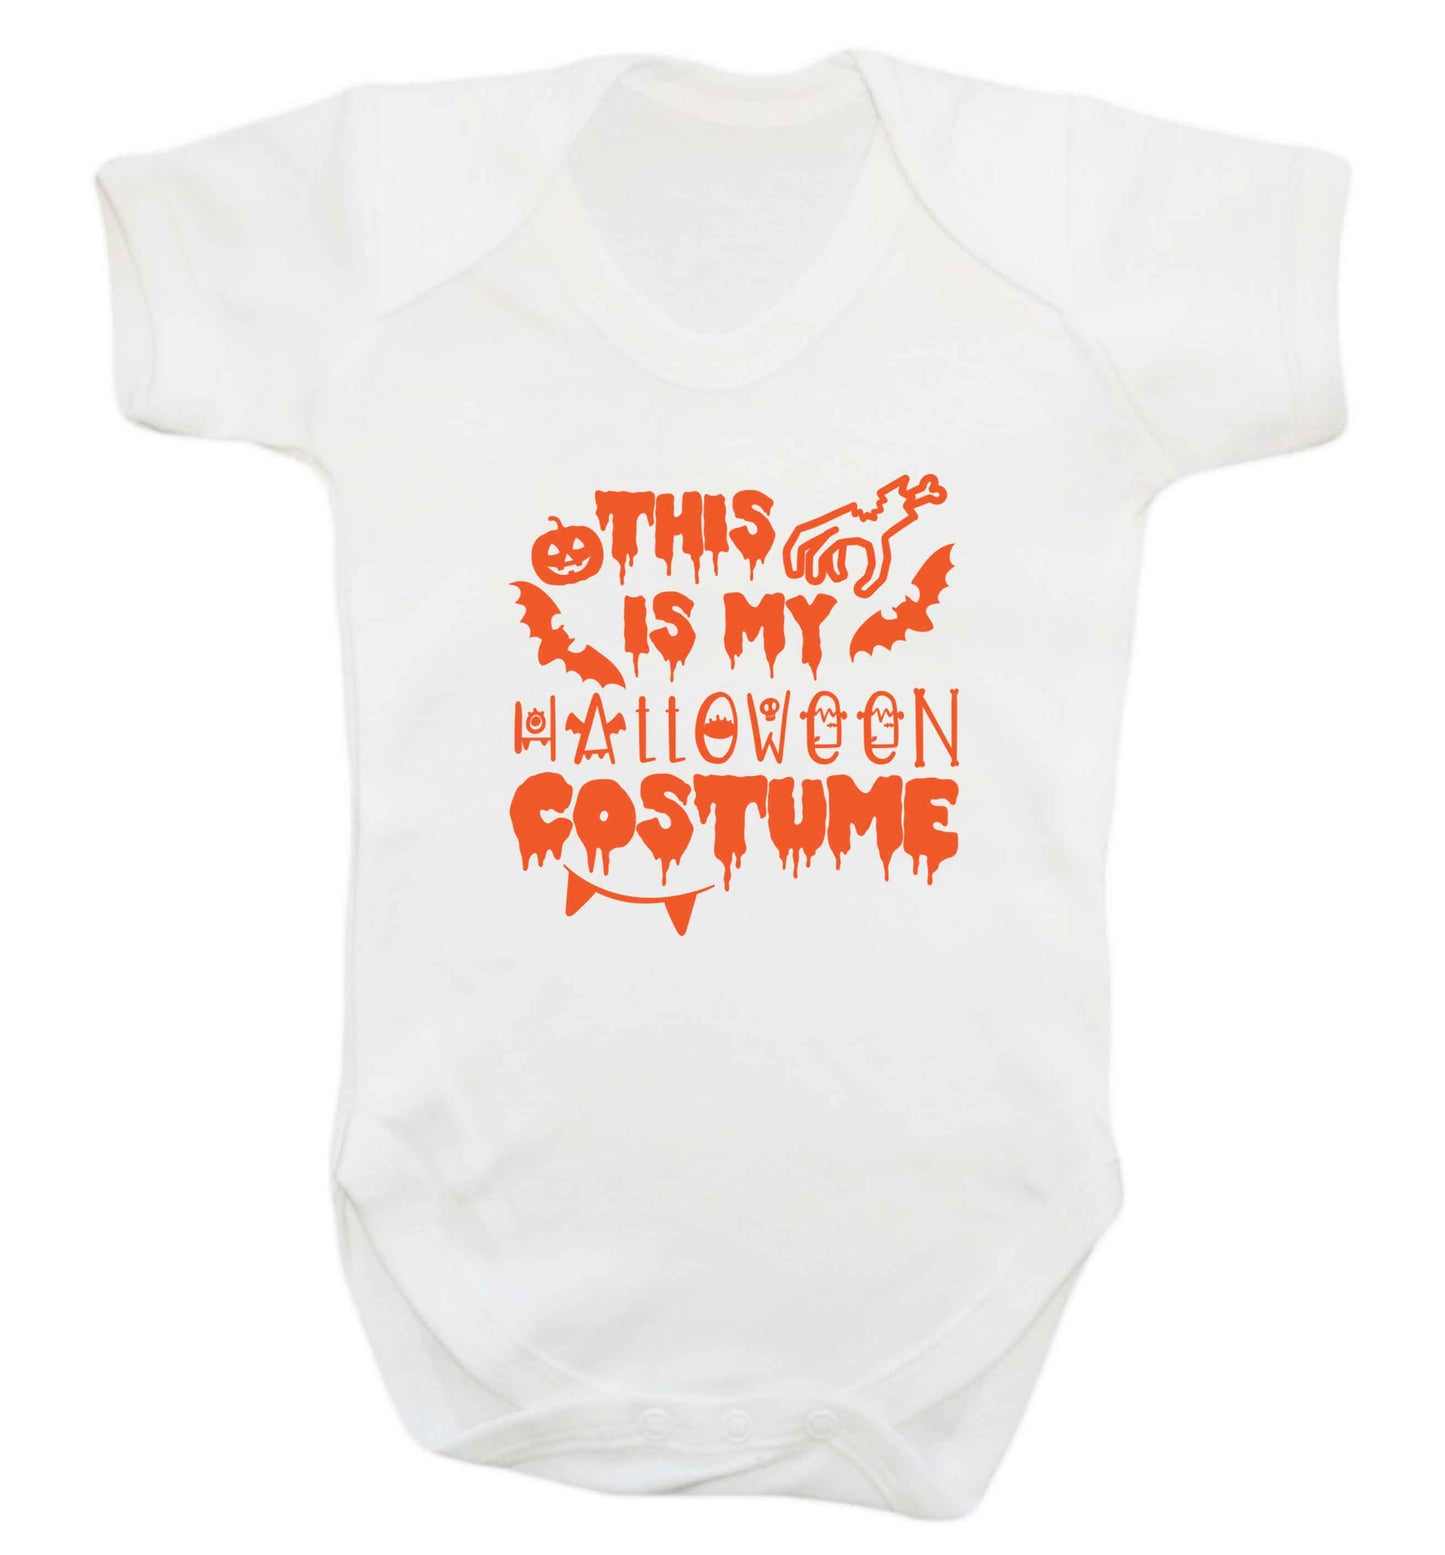 This is my halloween costume baby vest white 18-24 months